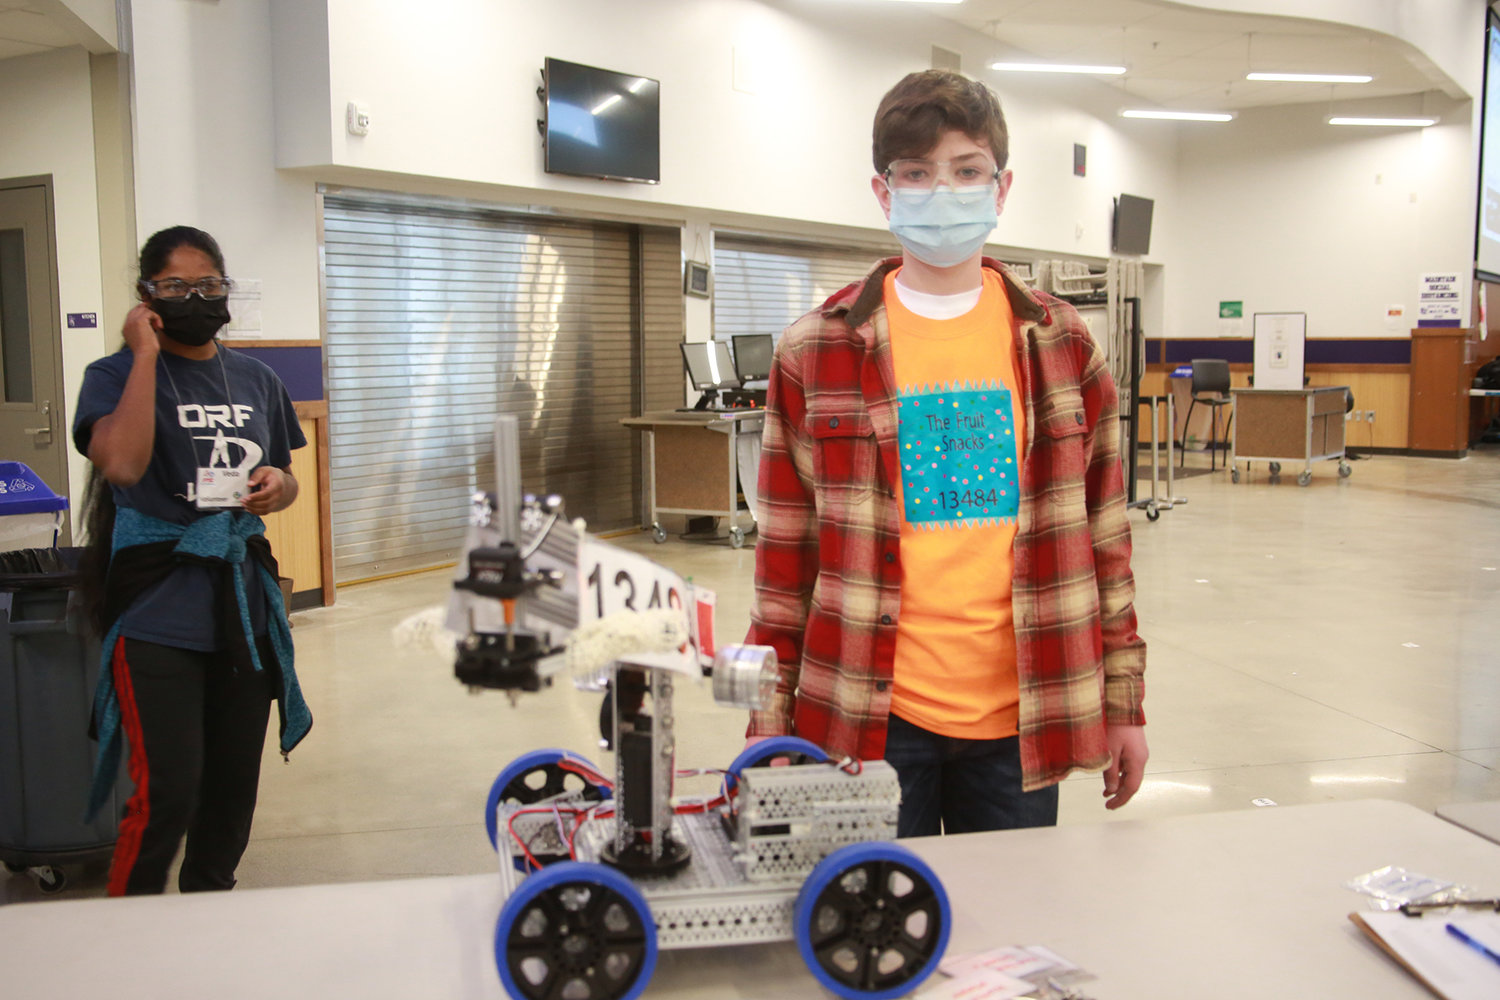 Derrik Yasson, a student from Capital High School, poses next to his robot.